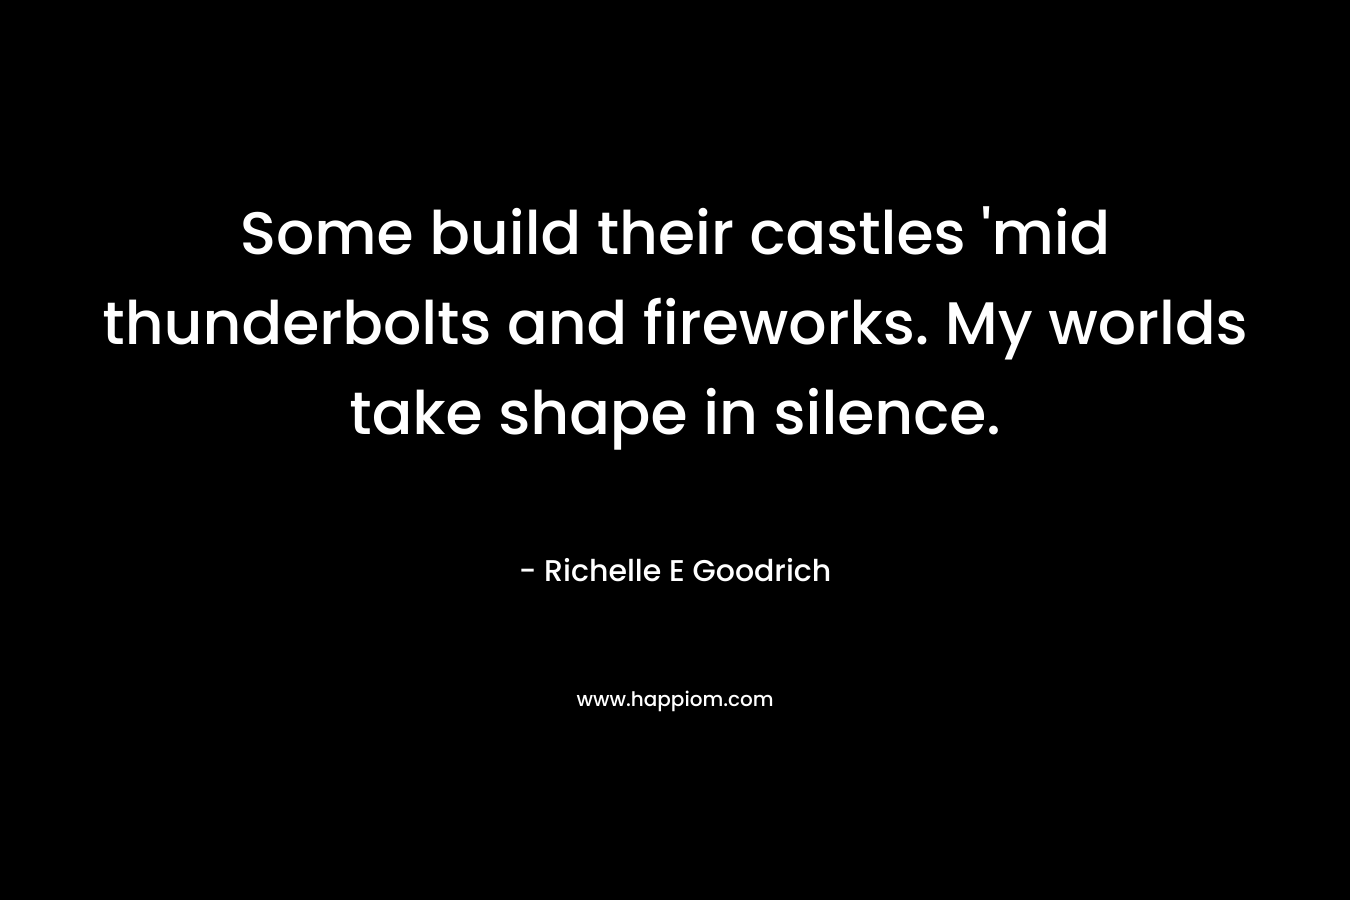 Some build their castles 'mid thunderbolts and fireworks. My worlds take shape in silence.